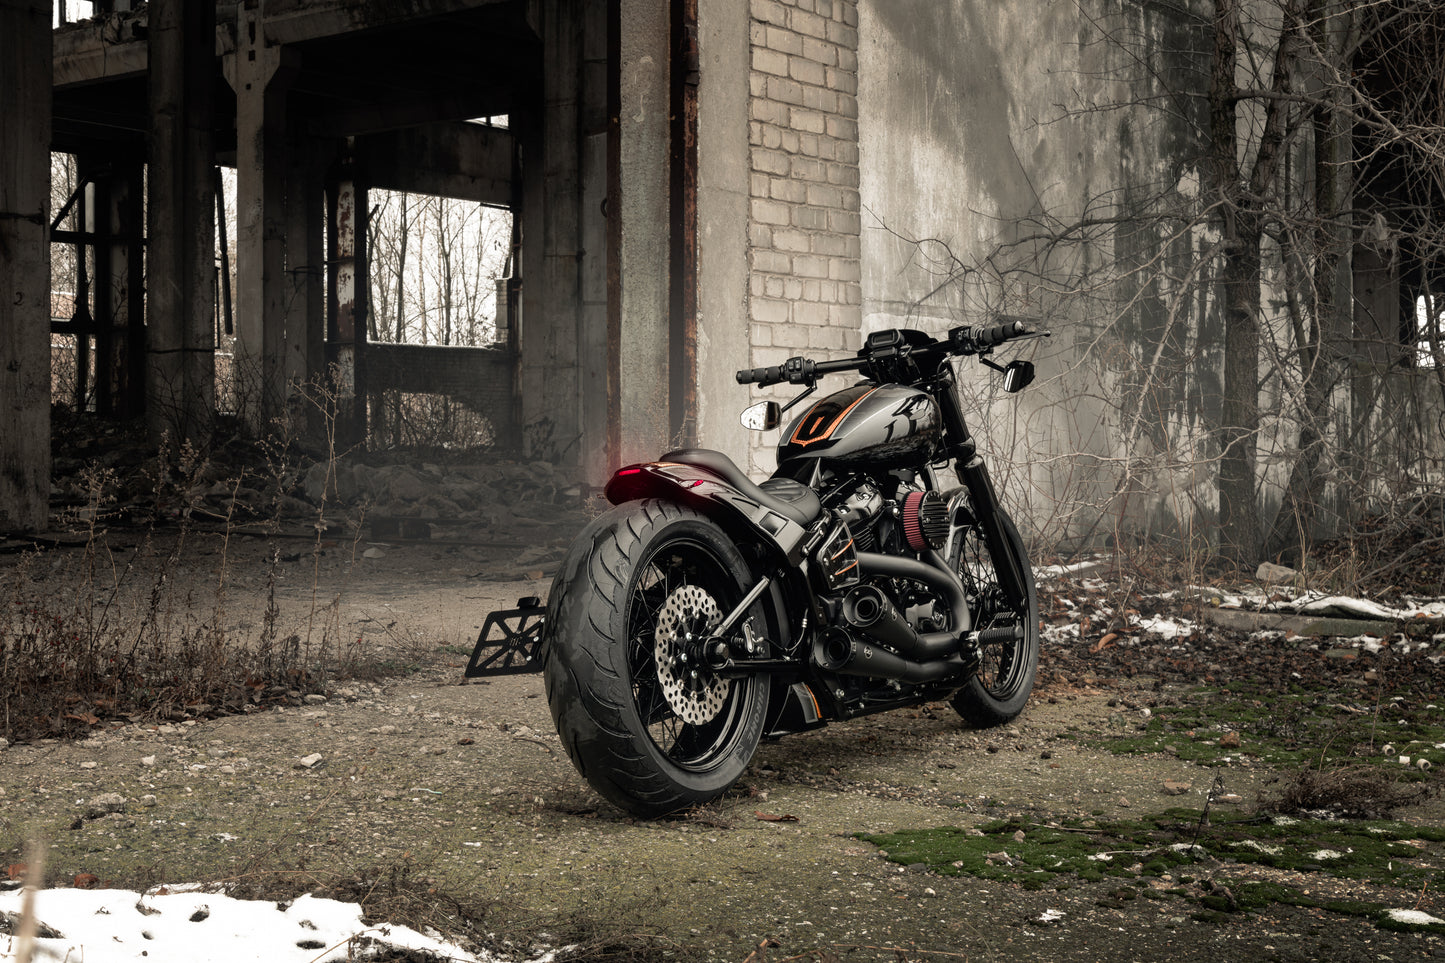 Harley Davidson motorcycle with Killer Custom  running/brake/turn signals - taillight from the rear outside in an abandoned environment